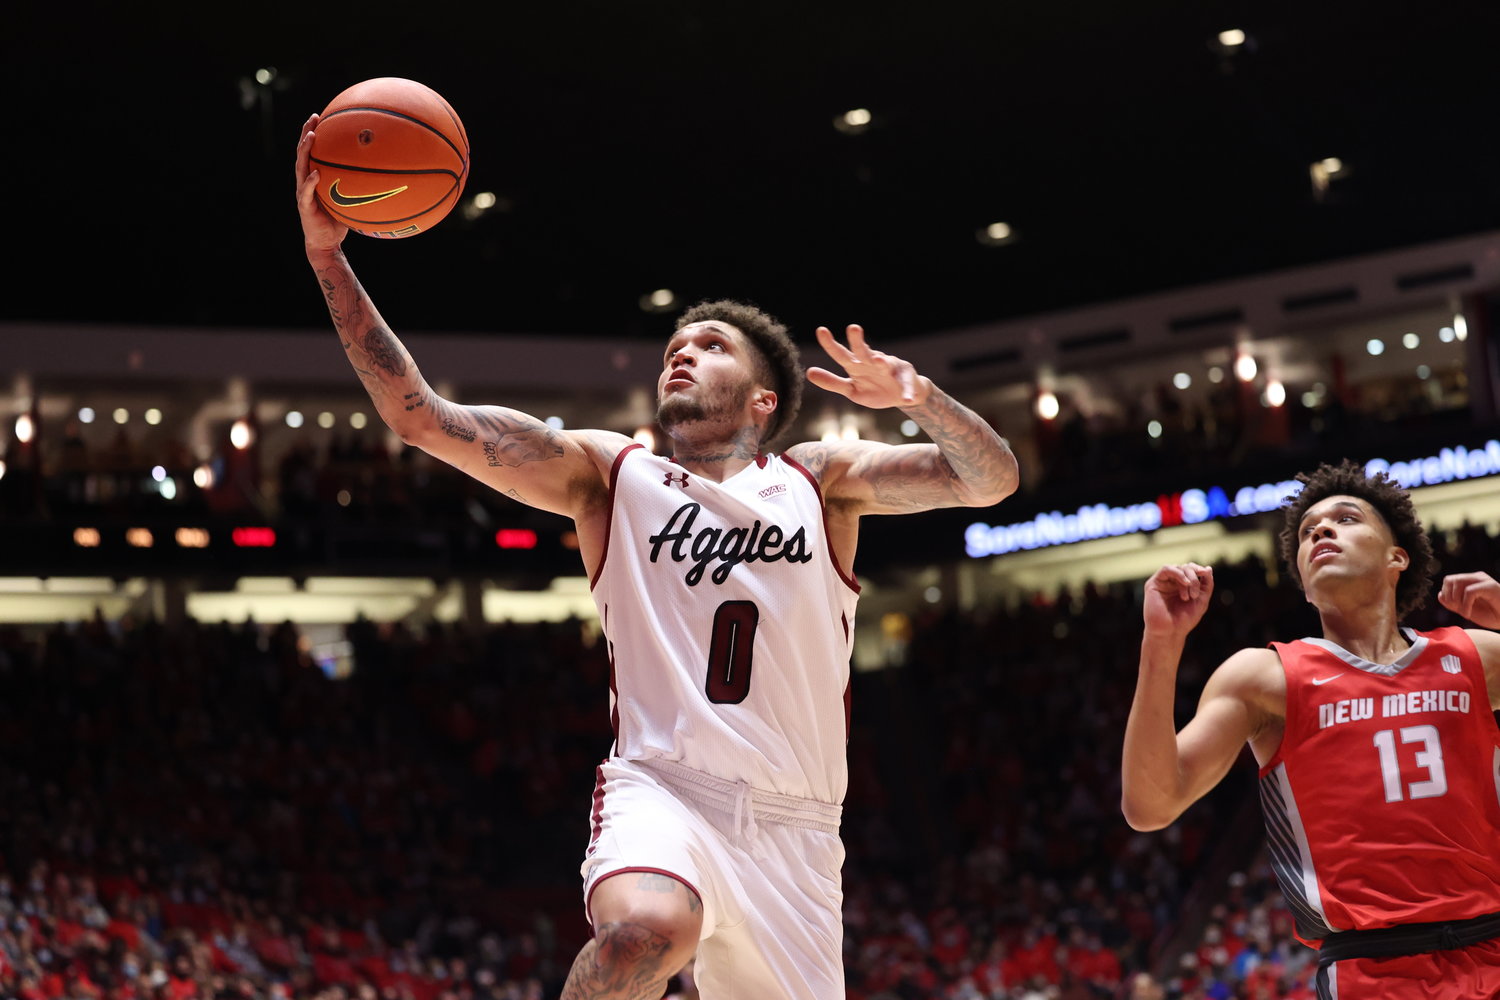 New Mexico State’s Teddy Allen drives to the hoop against the University of New Mexico Dec. 6 in The Pit in Albuquerque.